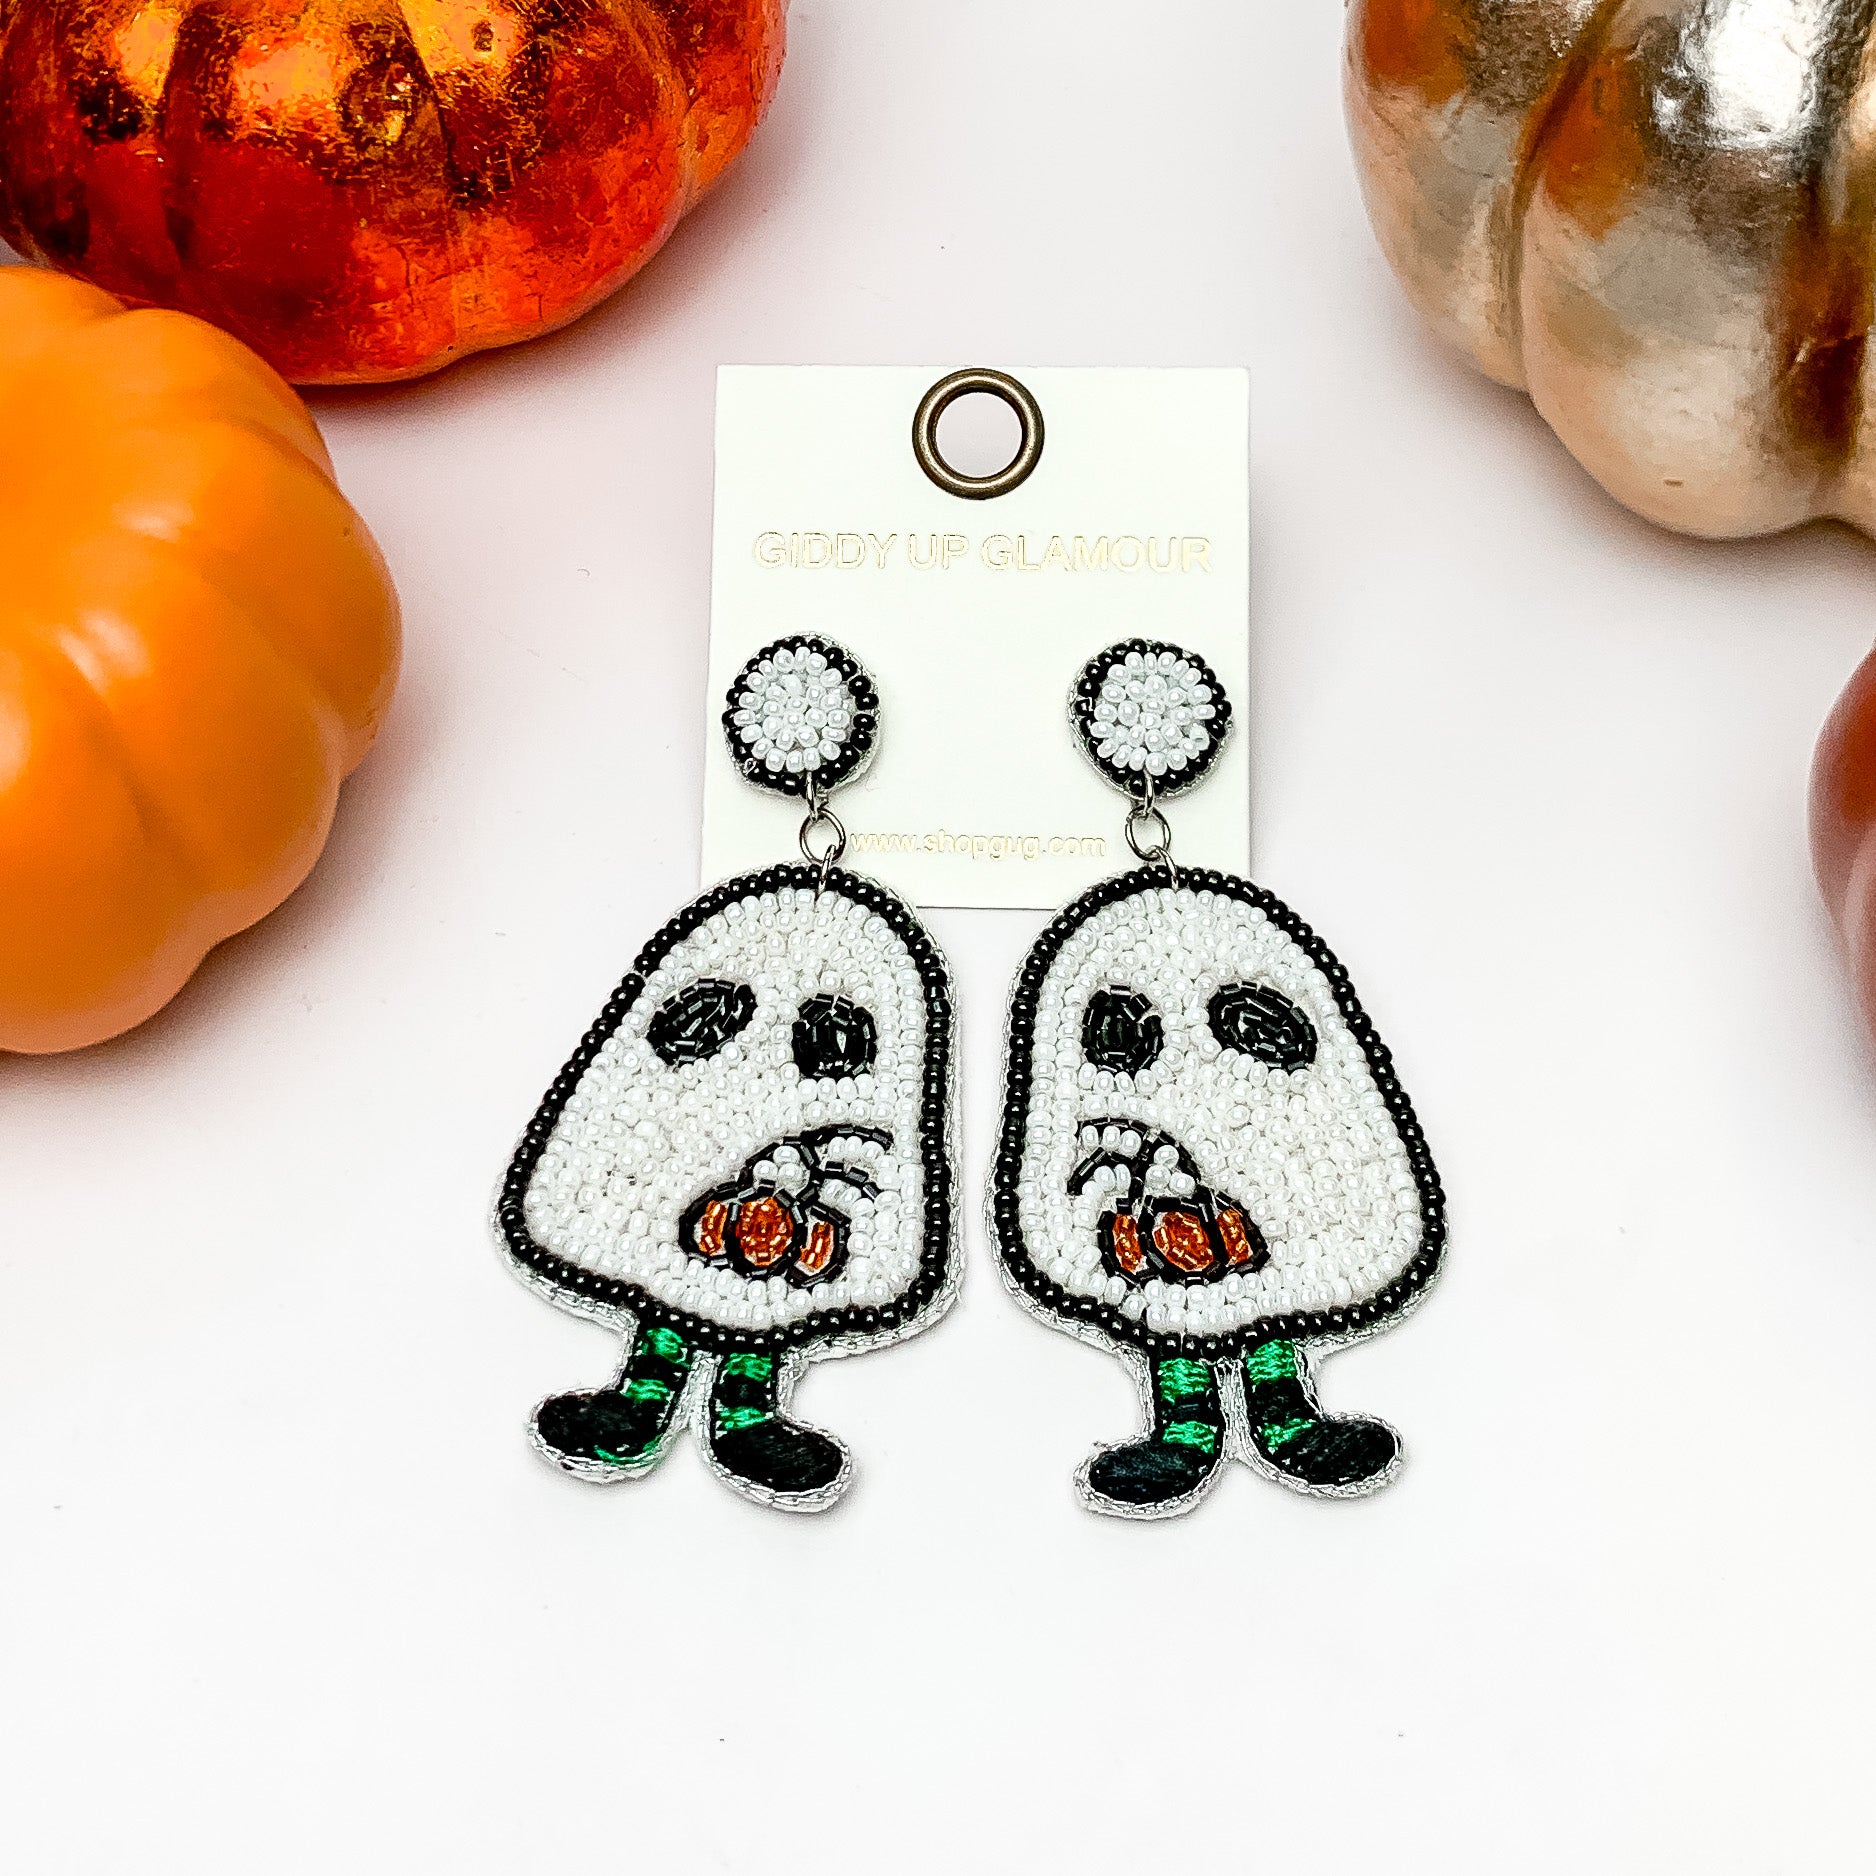 Ghost Boy Beaded Earrings in White. These earrings are on a white background with orange and silver pumpkins around them.